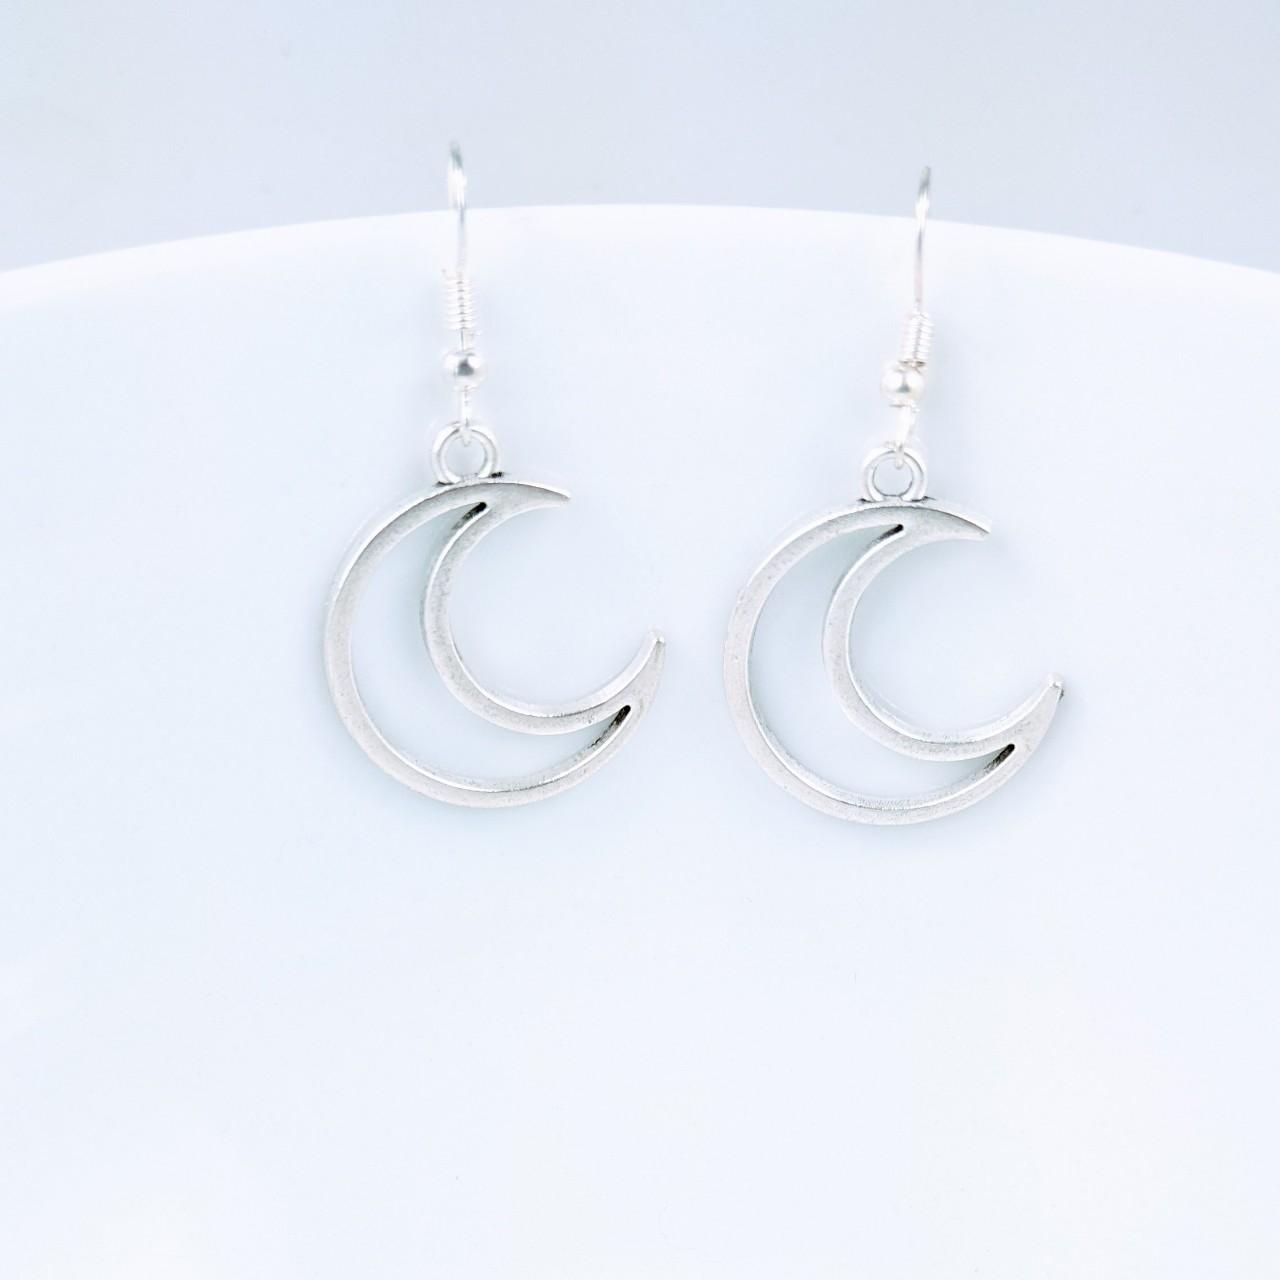 Product Image 2 - Crescent Moon Earrings
Brand new. 

Made